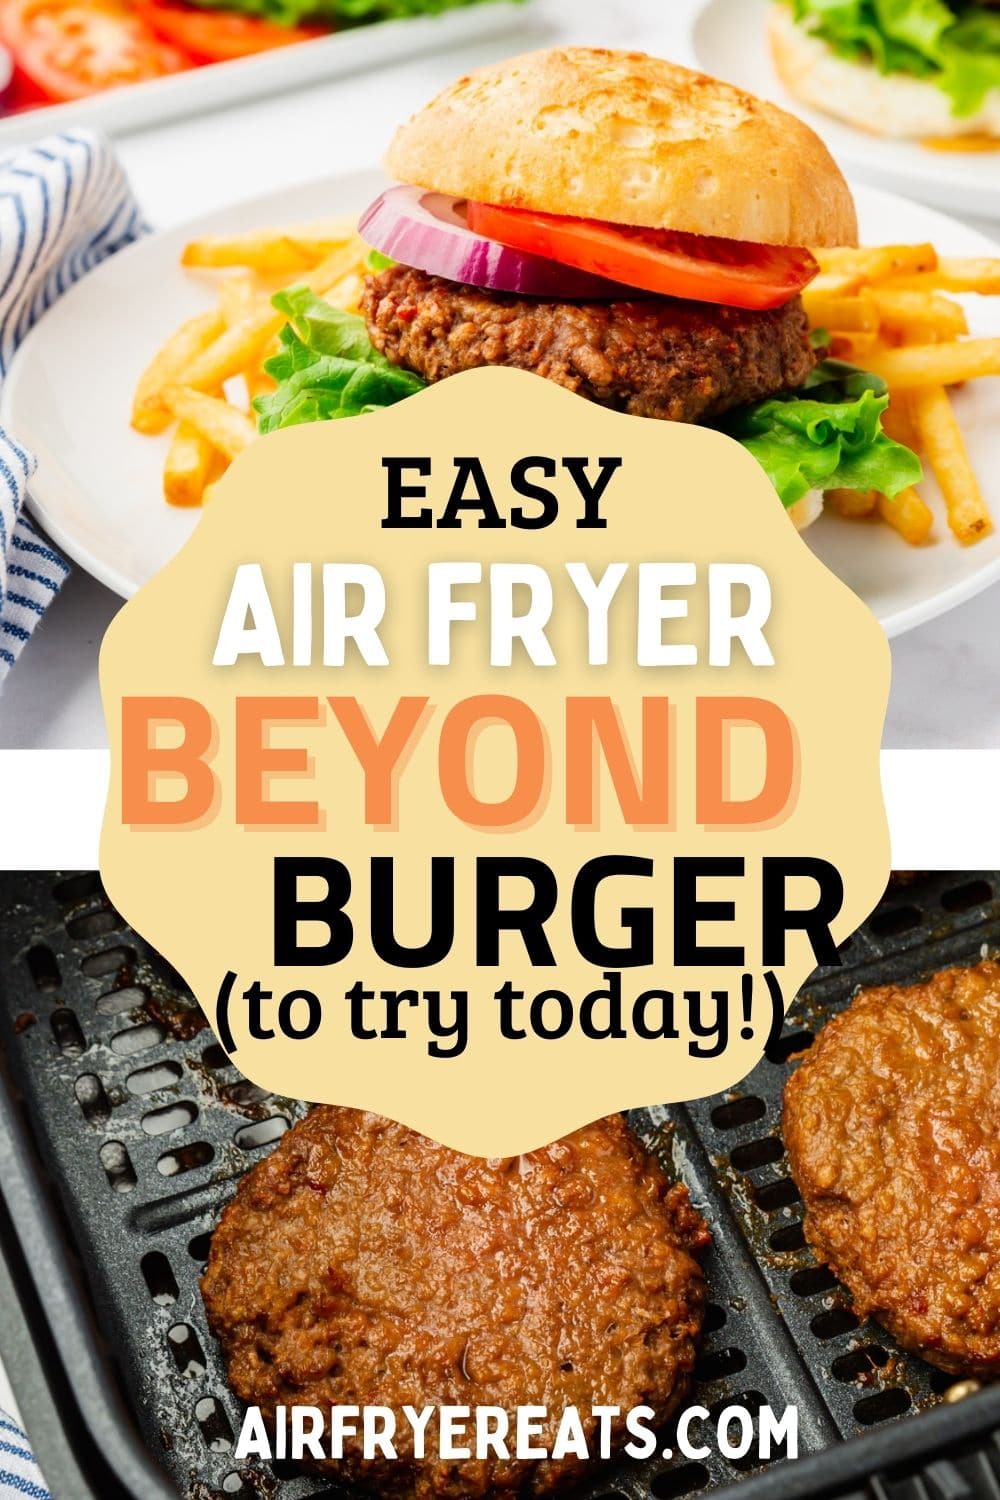 Learn to make an Air Fryer Beyond Burger! These vegetarian burger patties are so delicious and ready in just minutes using your favorite countertop appliance. via @vegetarianmamma